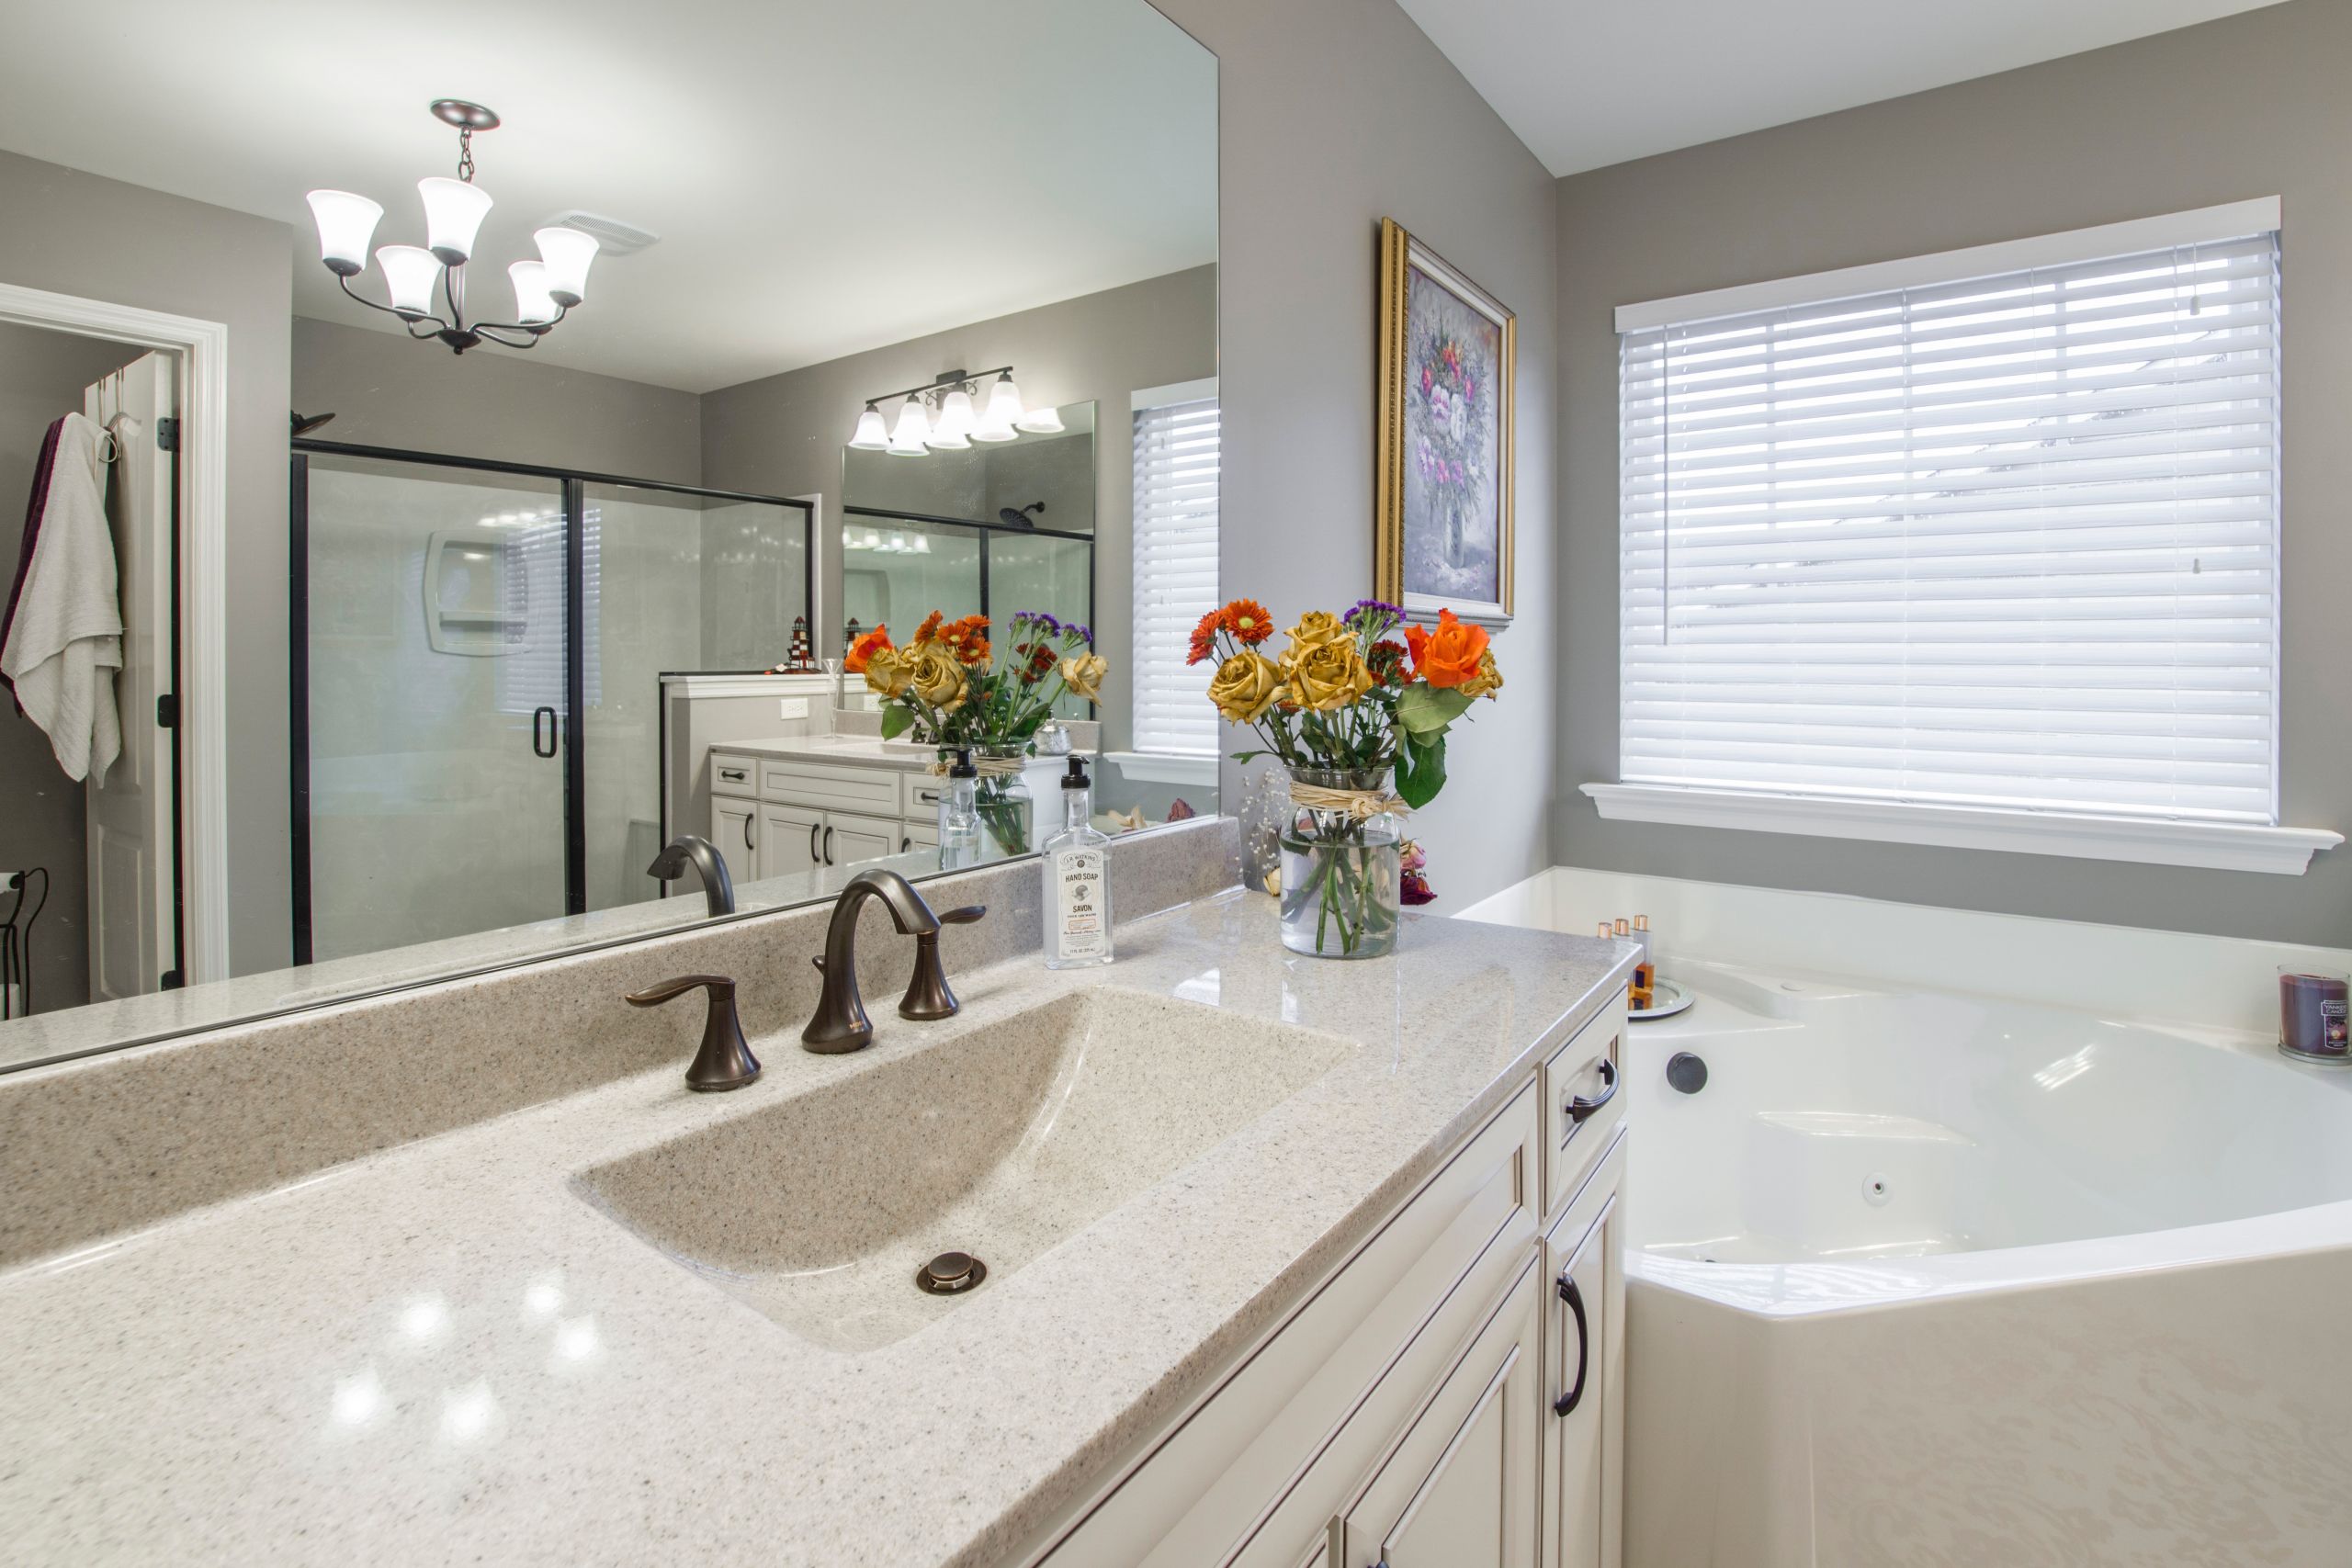 Bathroom Remodeling Ideas
 7 Bathroom Remodel Ideas to Look Out for in 2020